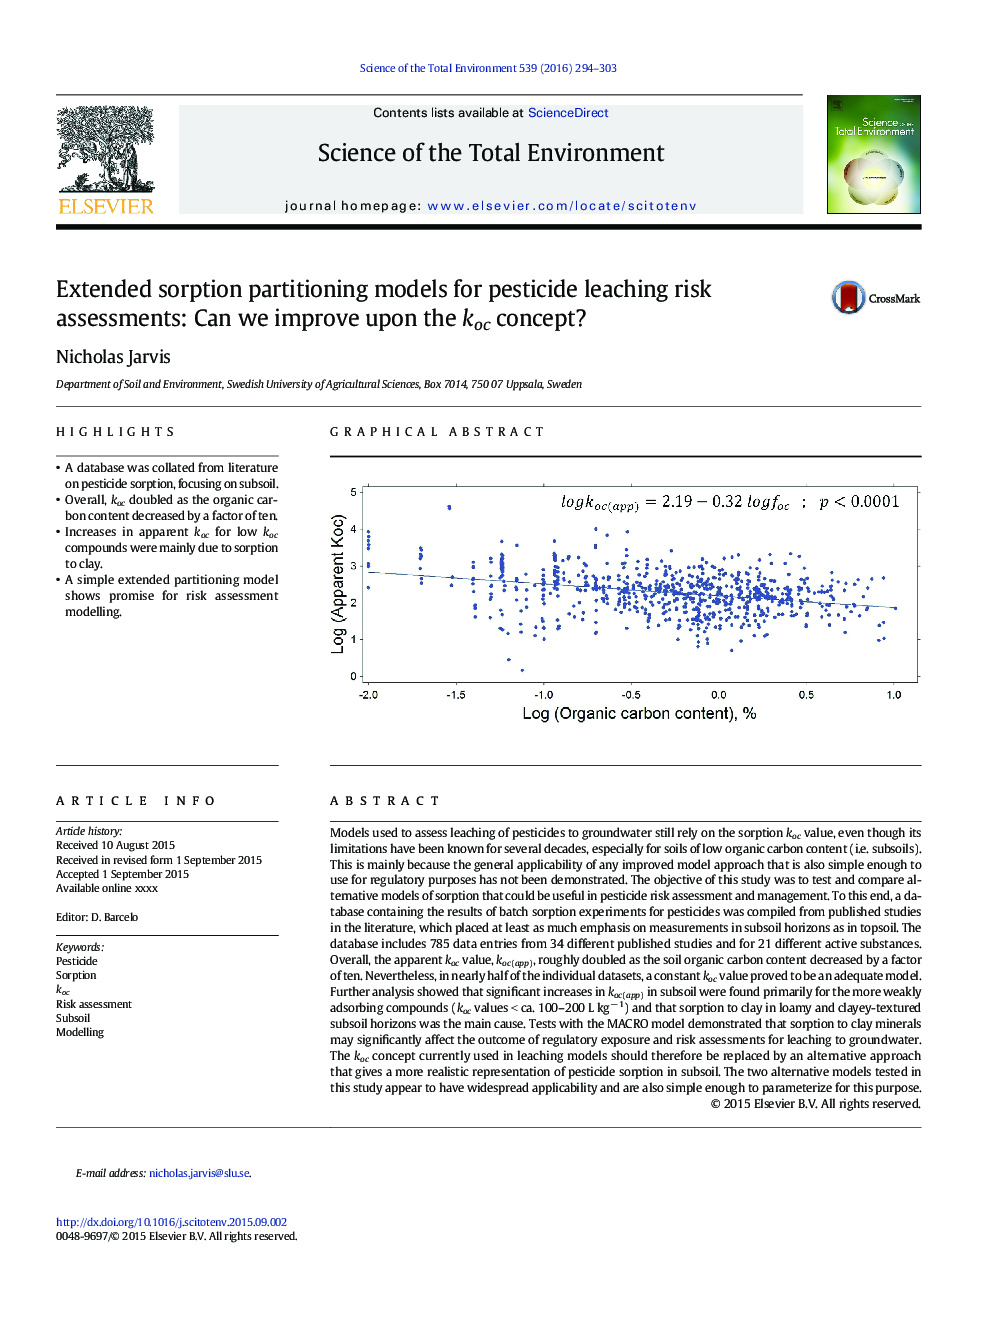 Extended sorption partitioning models for pesticide leaching risk assessments: Can we improve upon the koc concept?